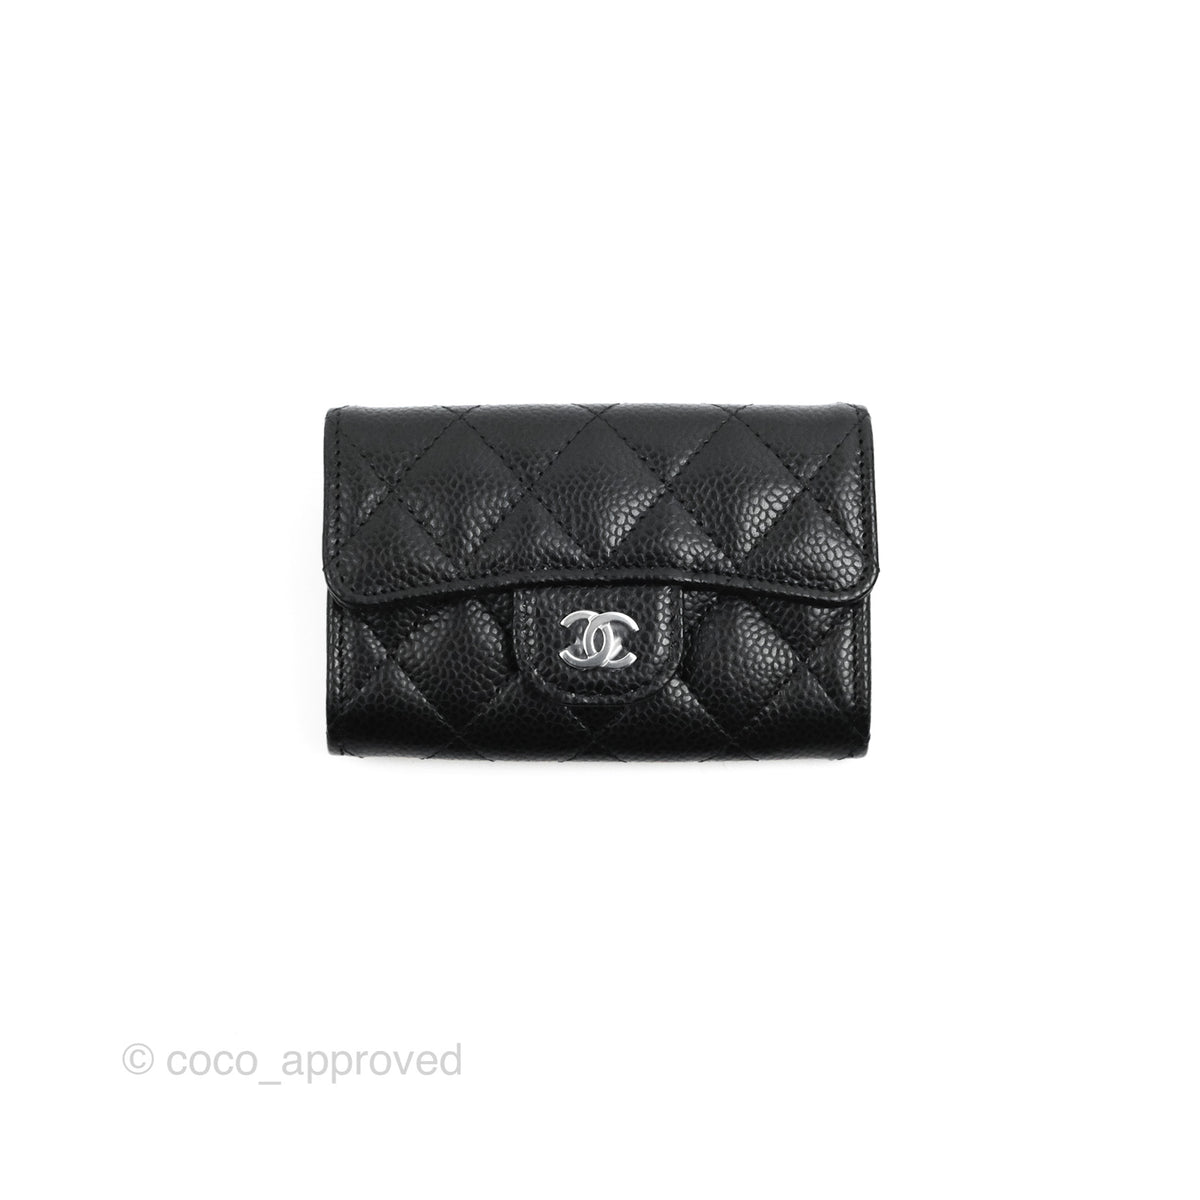 Chanel Flap Card Holder , Black, One Size